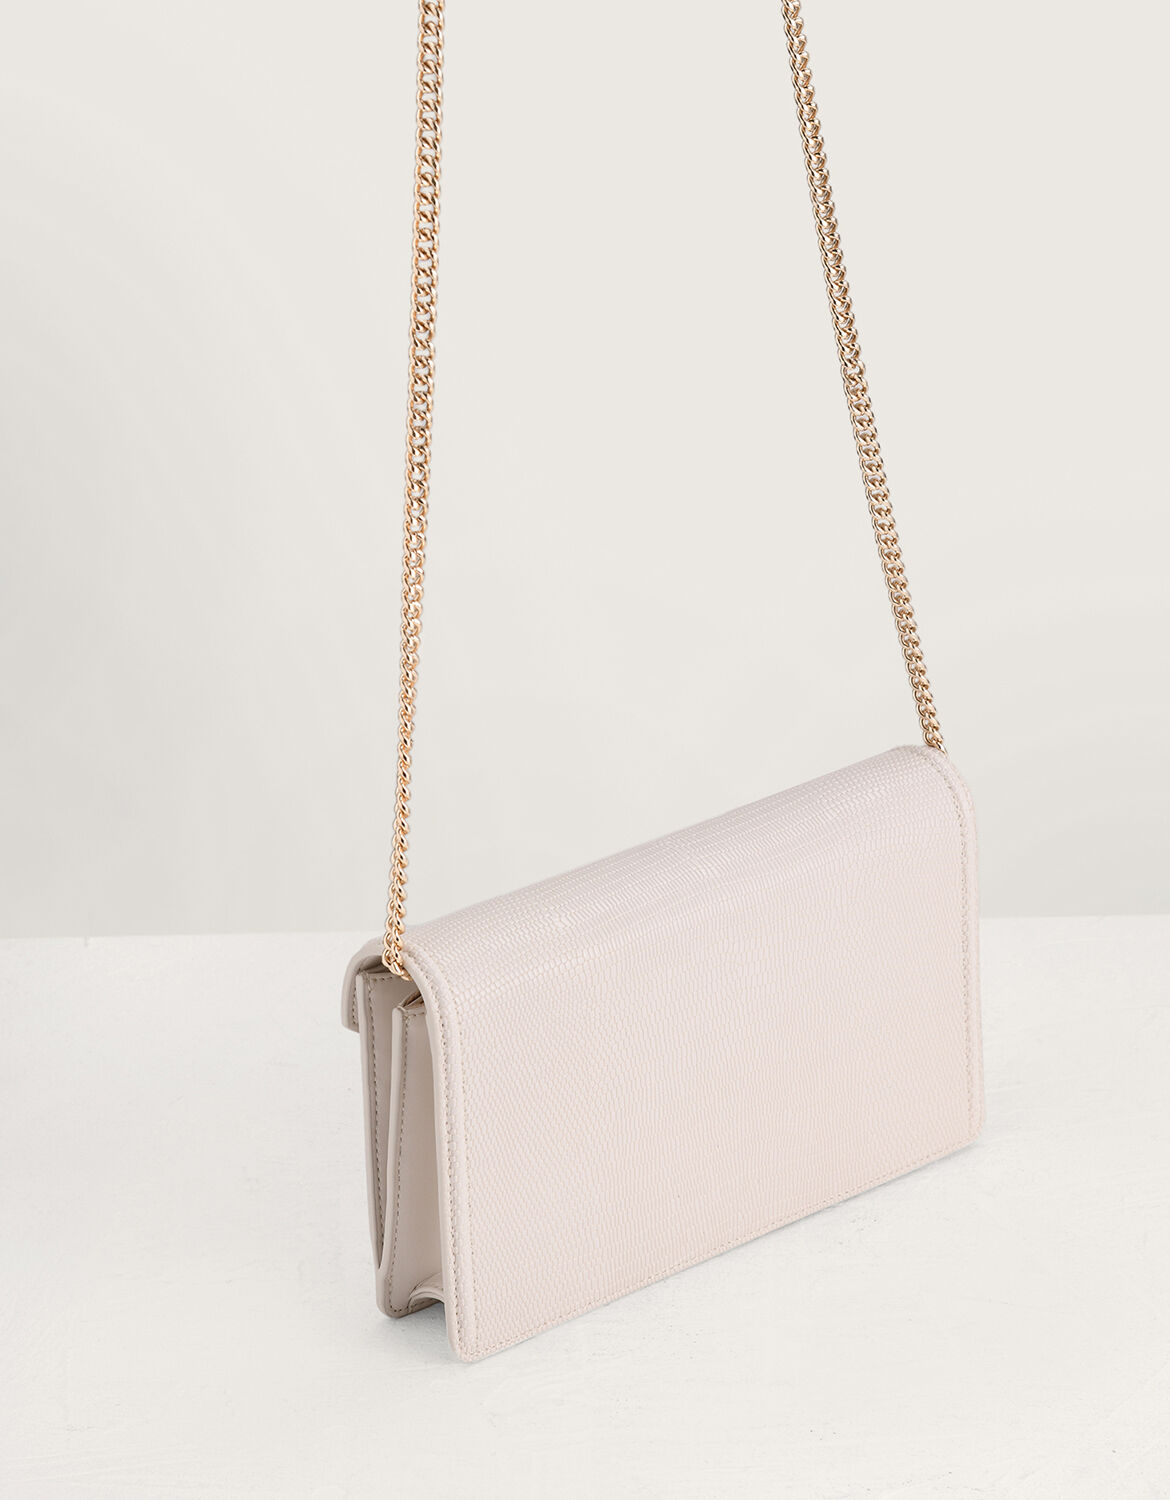 PEDRO Icon Leather Shoulder Bag - Taupe